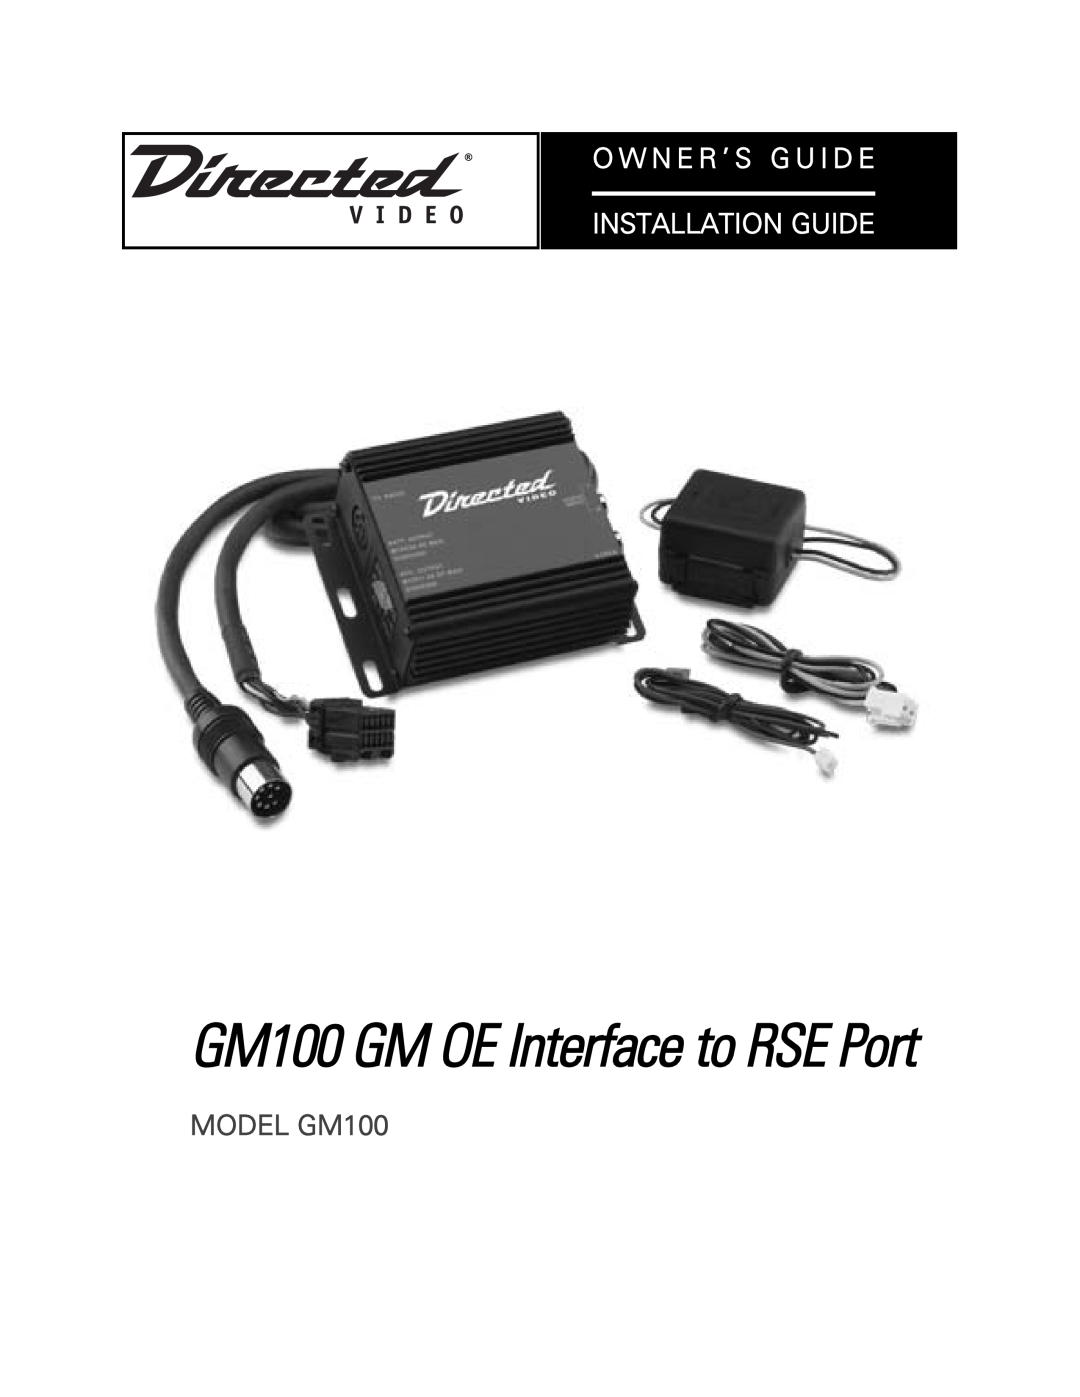 Directed Video manual GM100 GM OE Interface to RSE Port, O W N E R ’ S G U I D E Installation Guide, MODEL GM100 